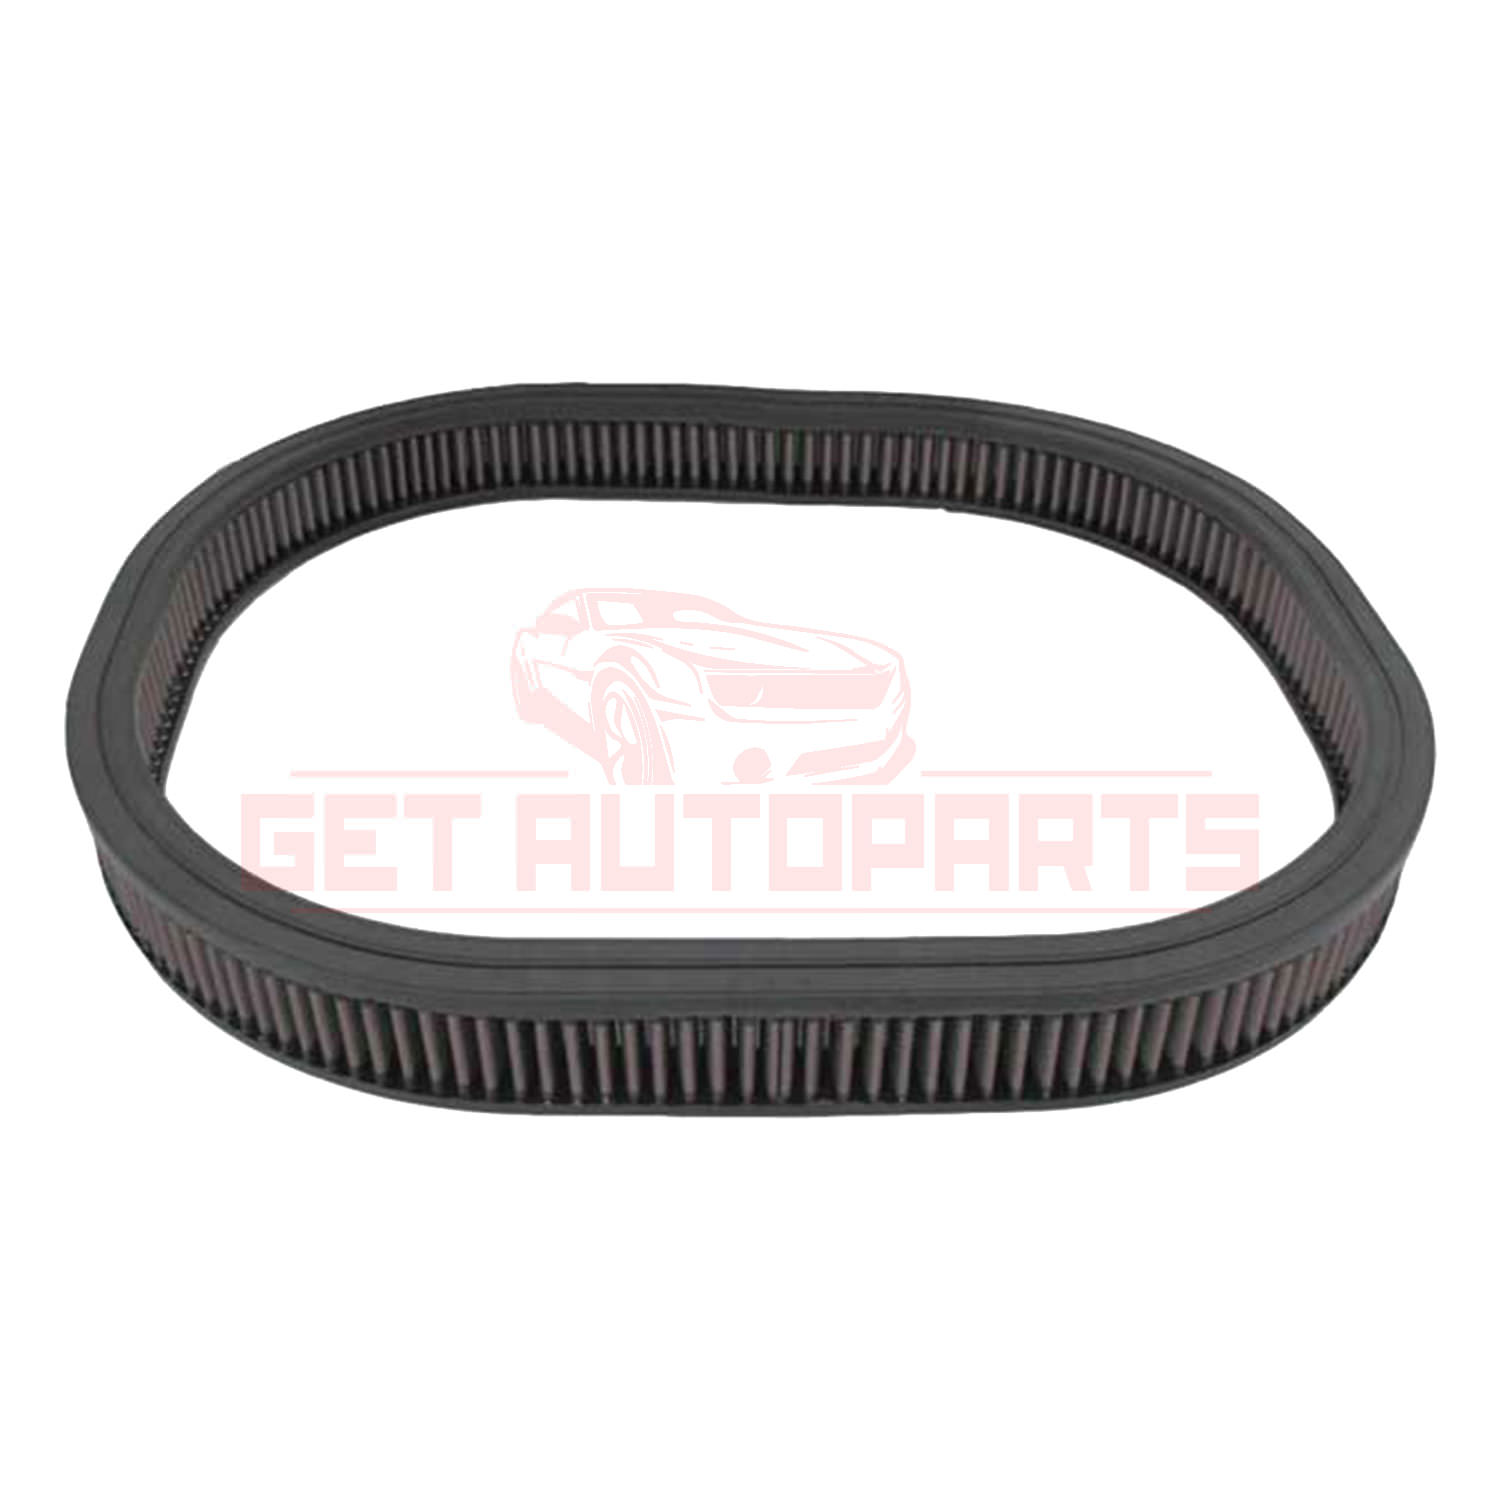 K&N Replacement Air Filter for Dodge Coronet 1966-1971